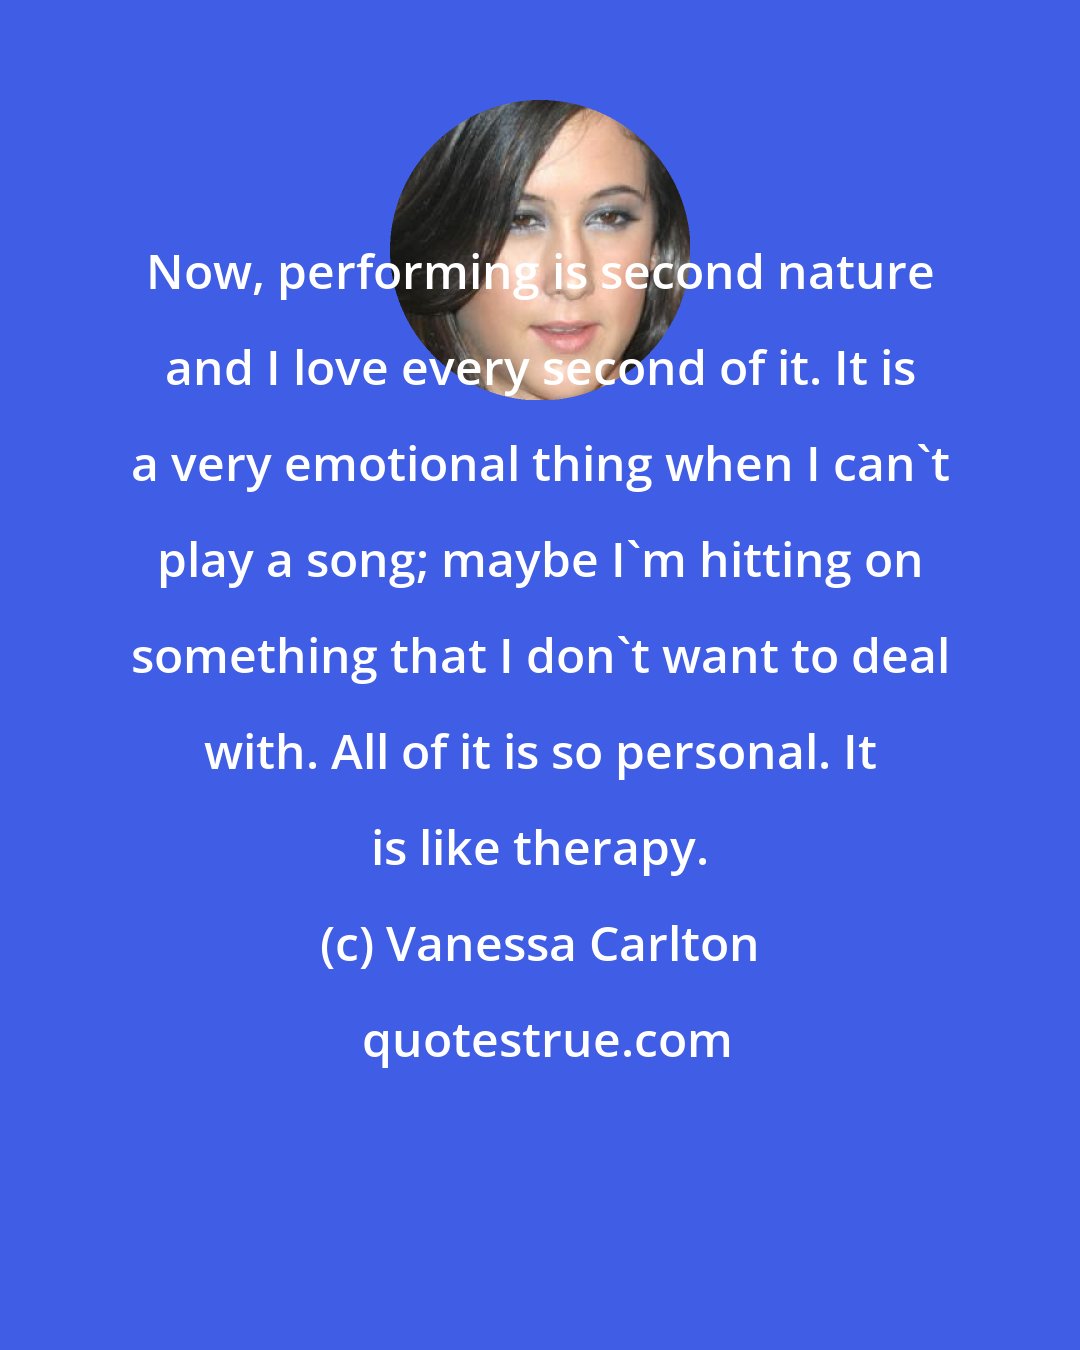 Vanessa Carlton: Now, performing is second nature and I love every second of it. It is a very emotional thing when I can't play a song; maybe I'm hitting on something that I don't want to deal with. All of it is so personal. It is like therapy.